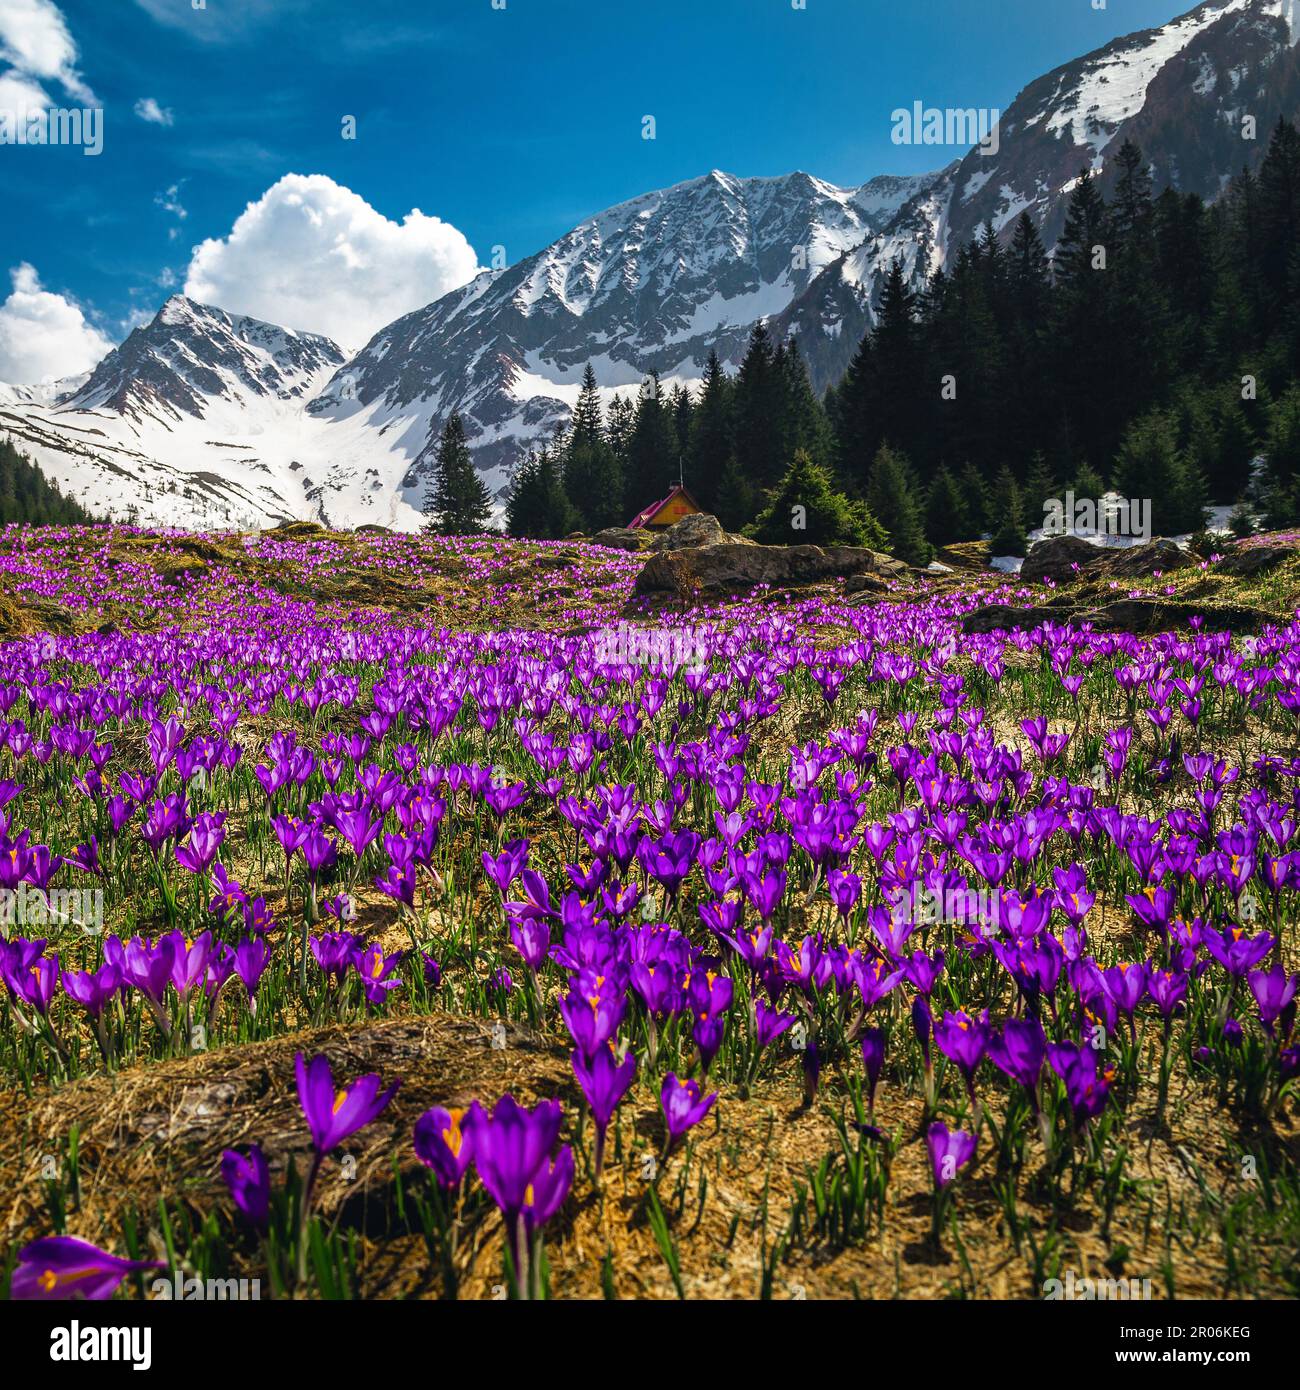 Beautiful spring landscape, flowery mountain slope with blooming purple crocus flowers and snowy mountains, Fagaras mountains, Carpathians, Transylvan Stock Photo